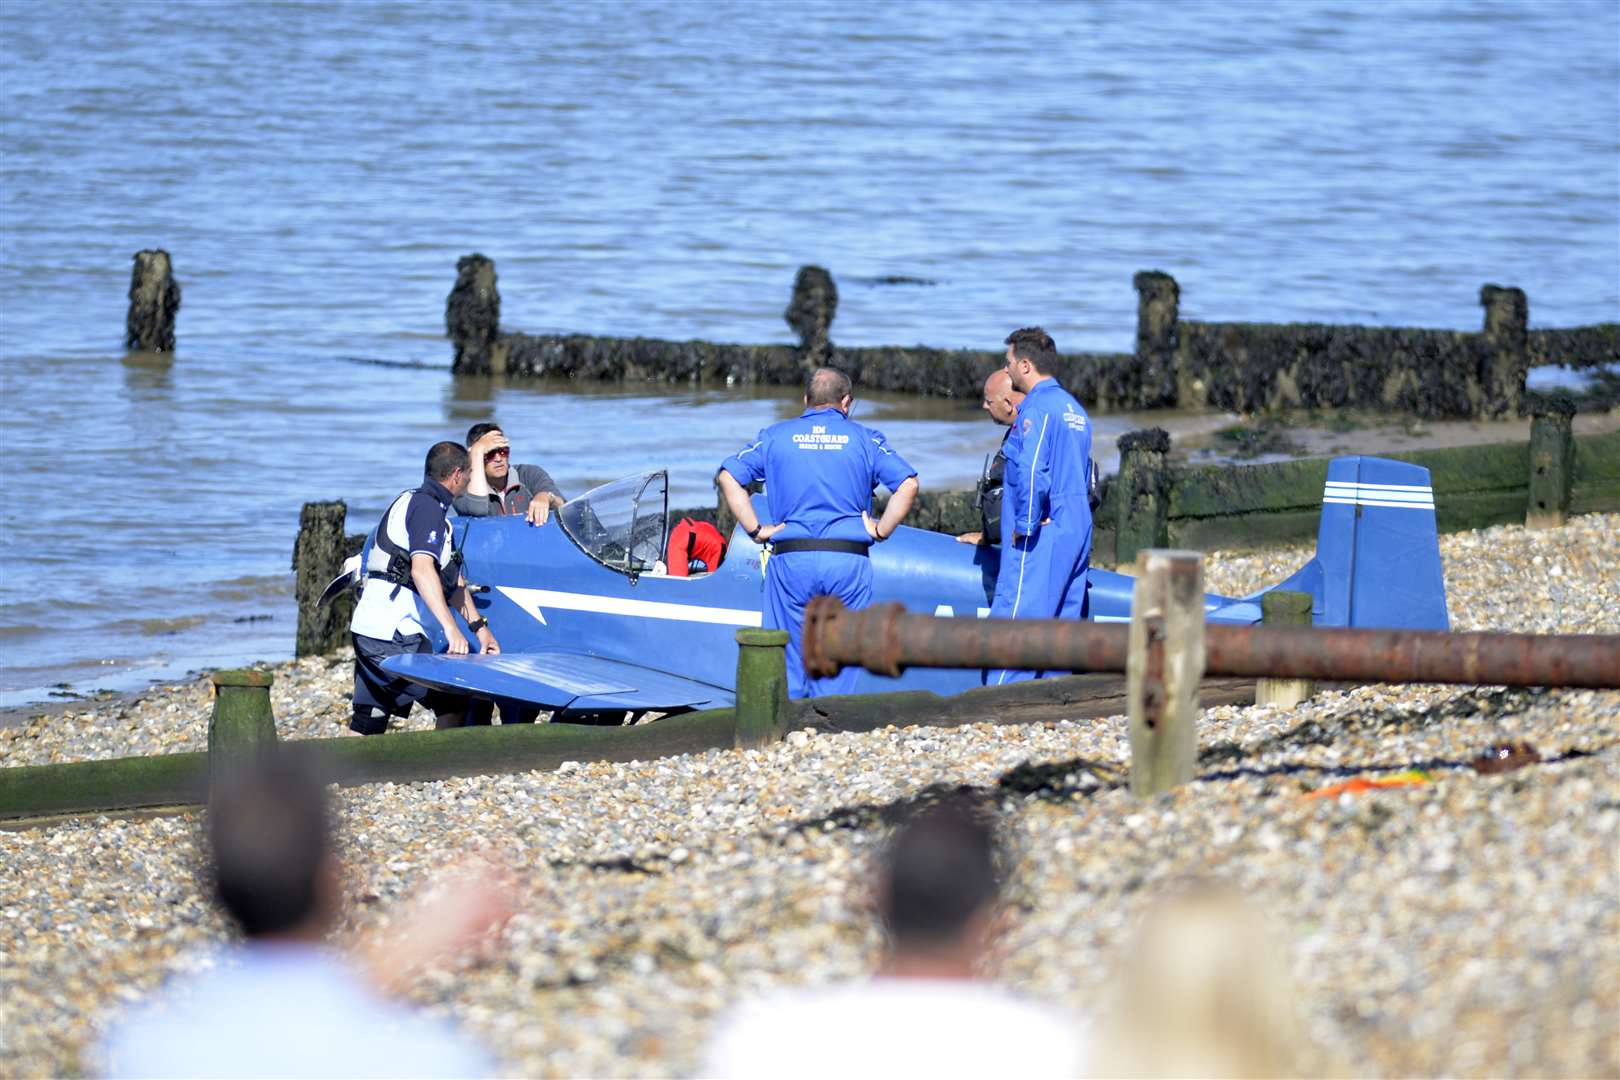 The plane is examined following the crash. Picture by Ruth Cuerden